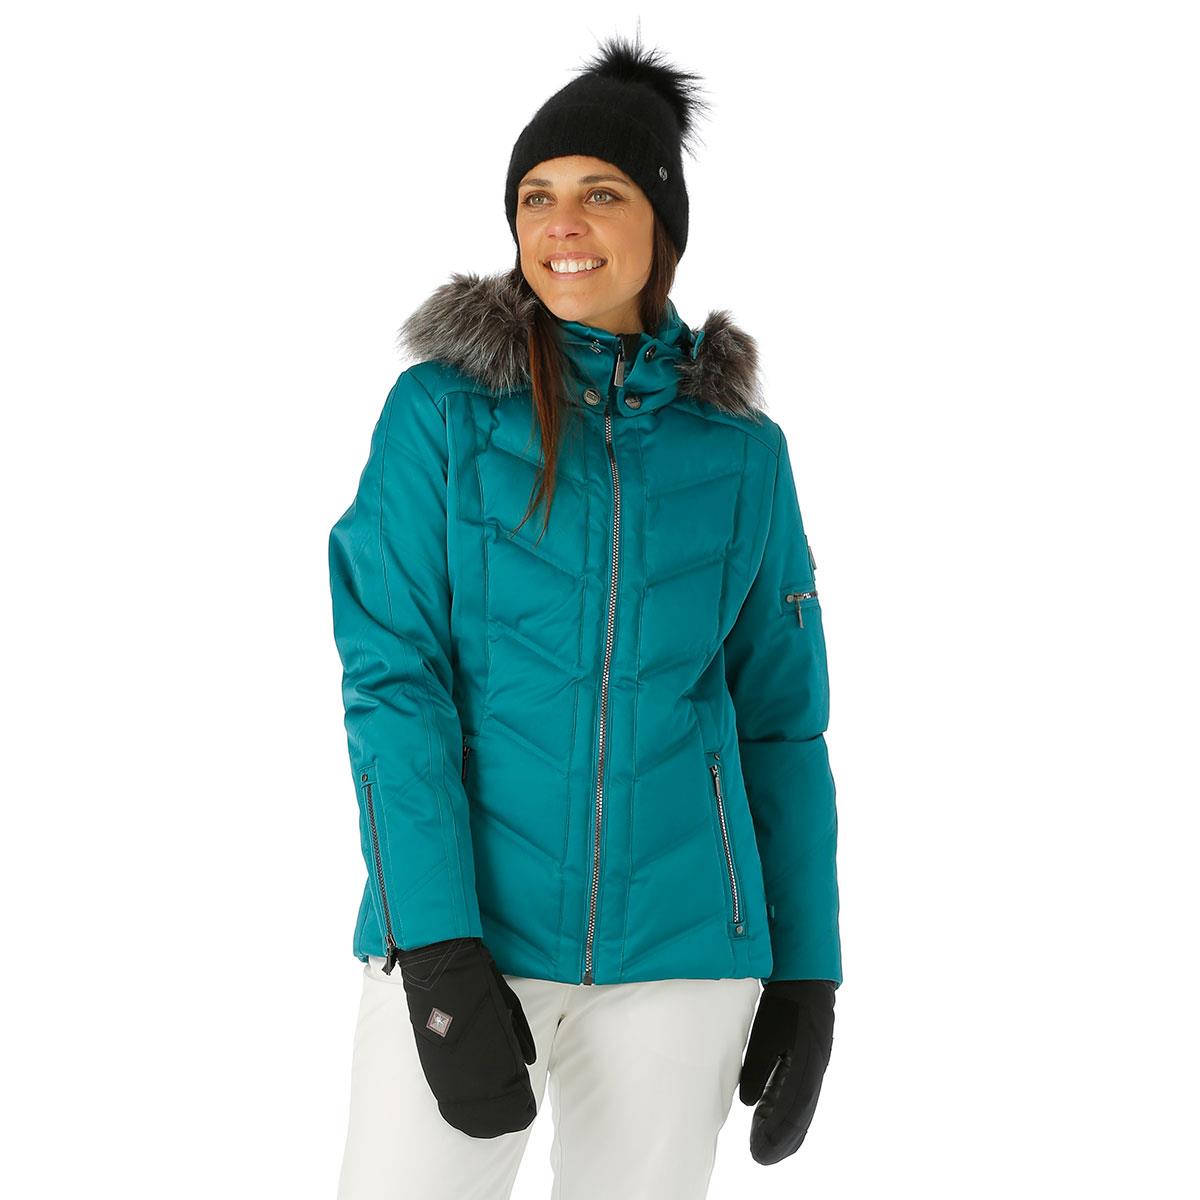 Nils Cervinia Insulated Ski Jacket with Faux Fur (Women's)